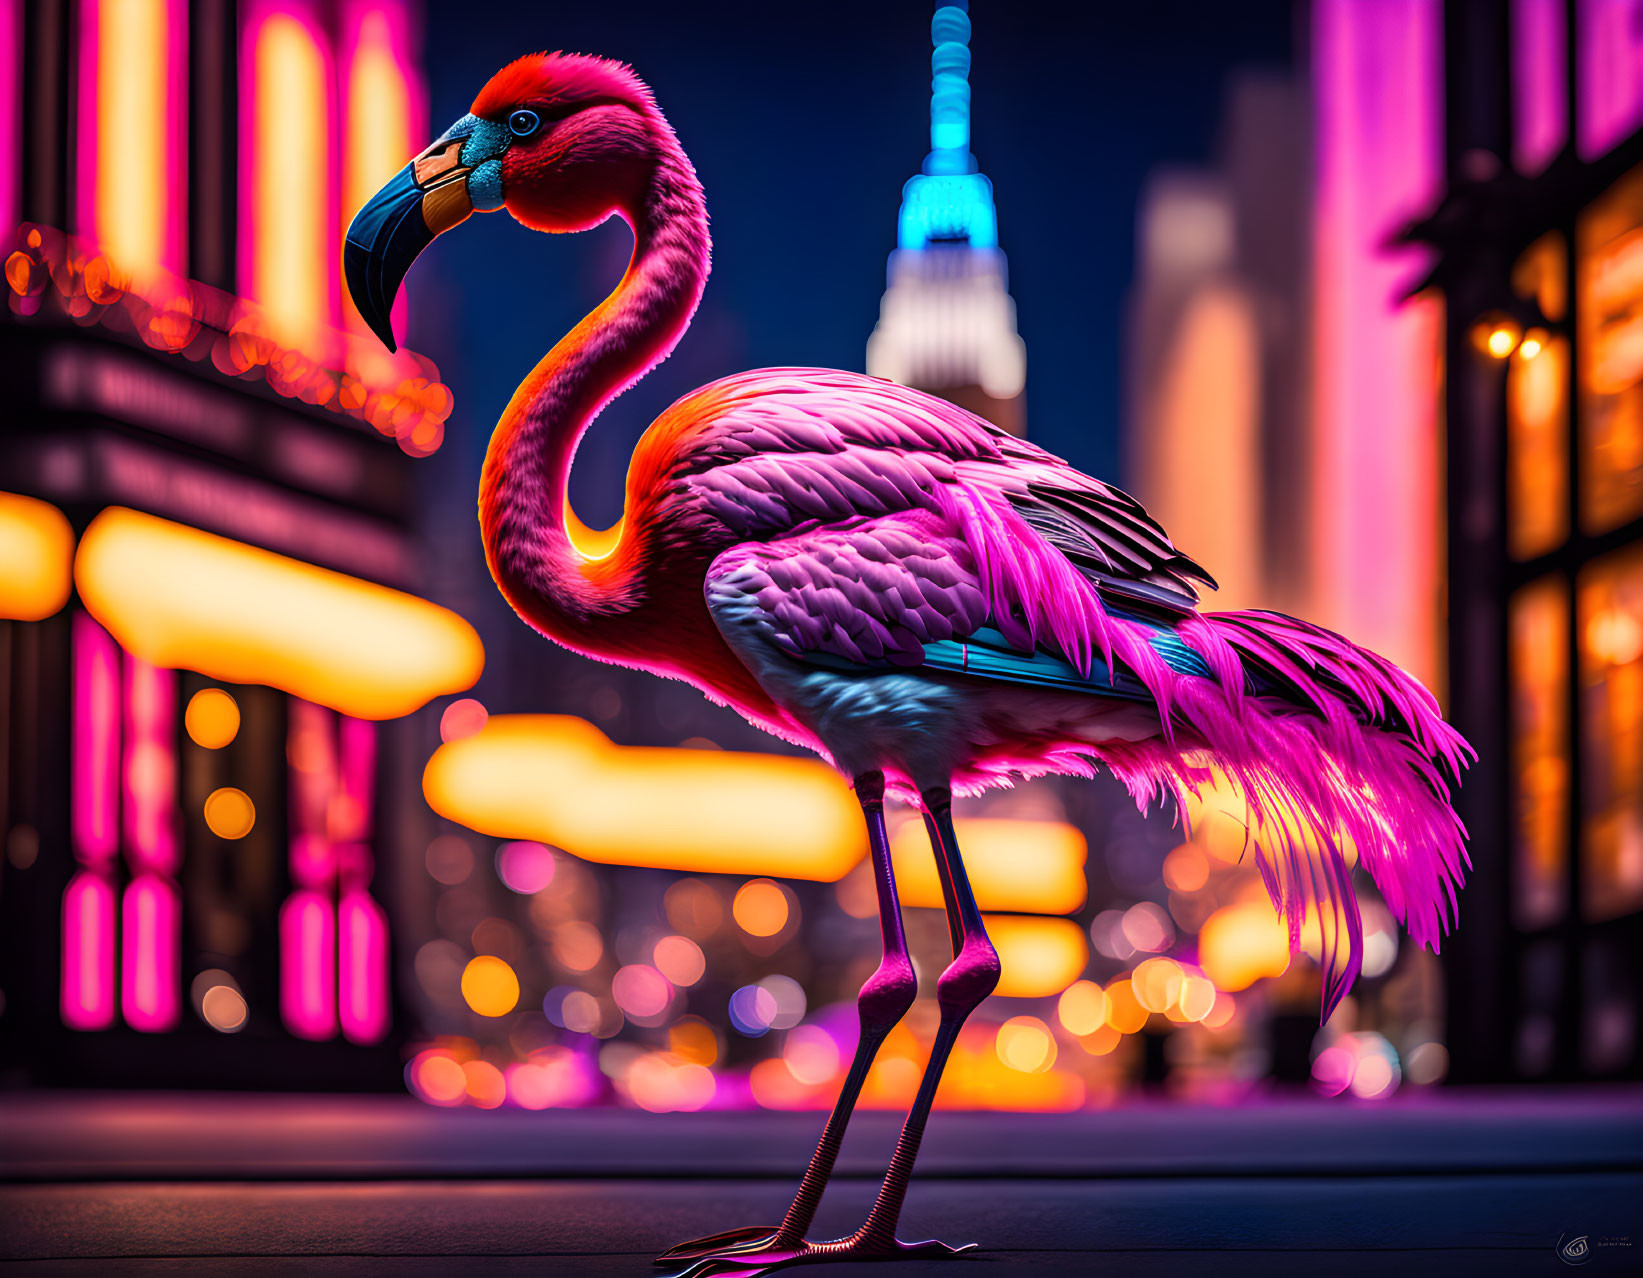 Colorful flamingo with city lights and iconic tower in background